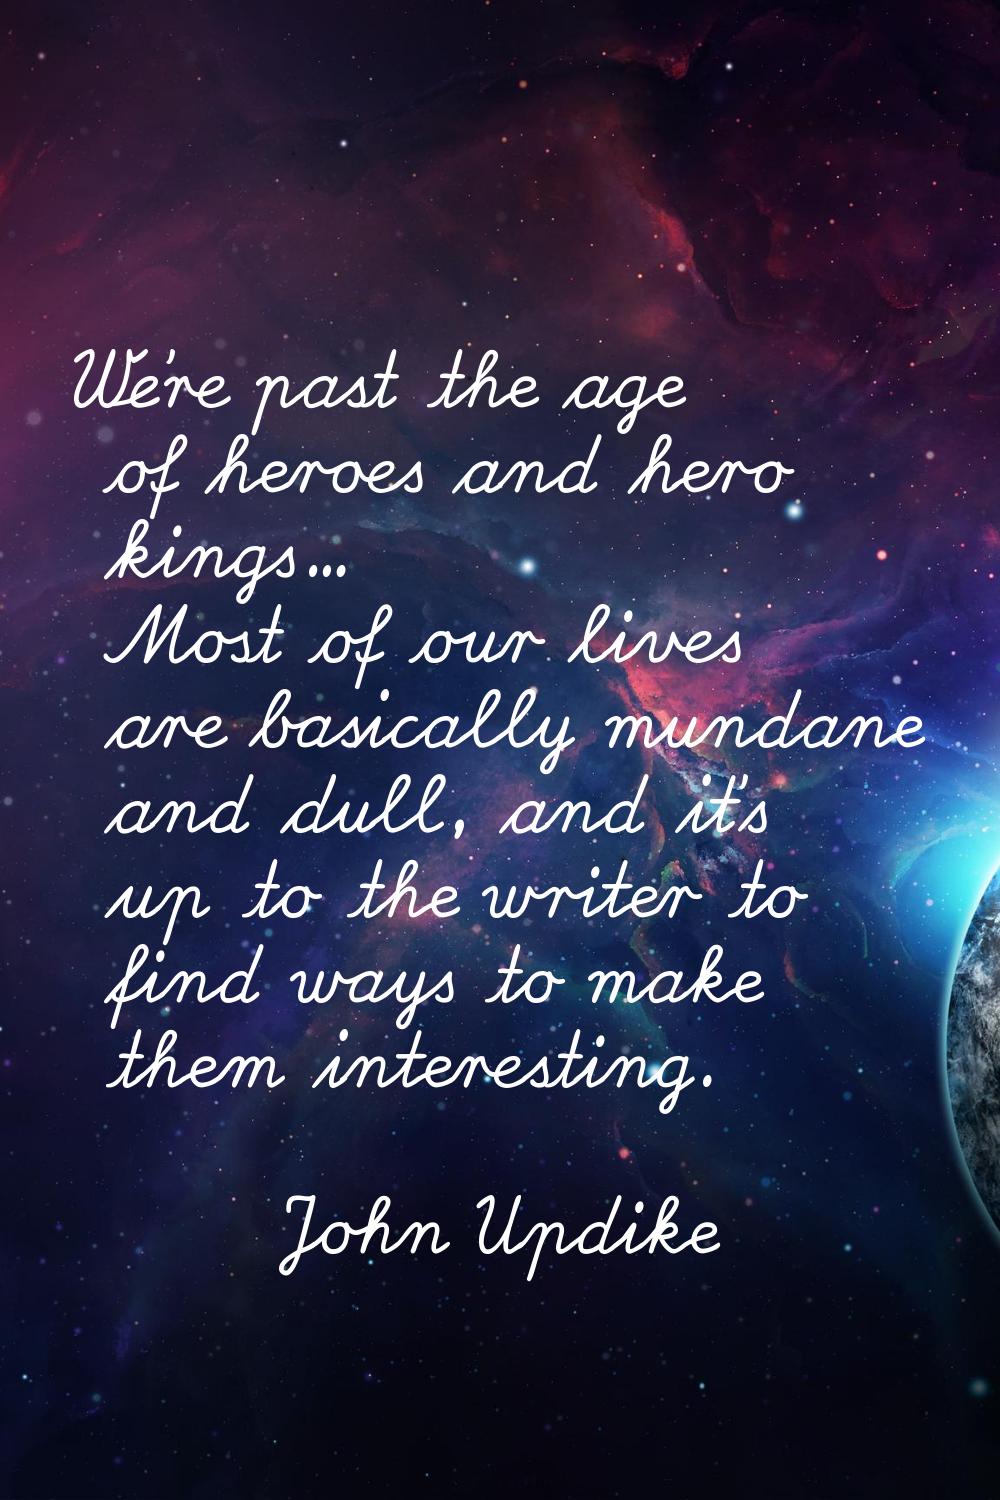 We're past the age of heroes and hero kings... Most of our lives are basically mundane and dull, an